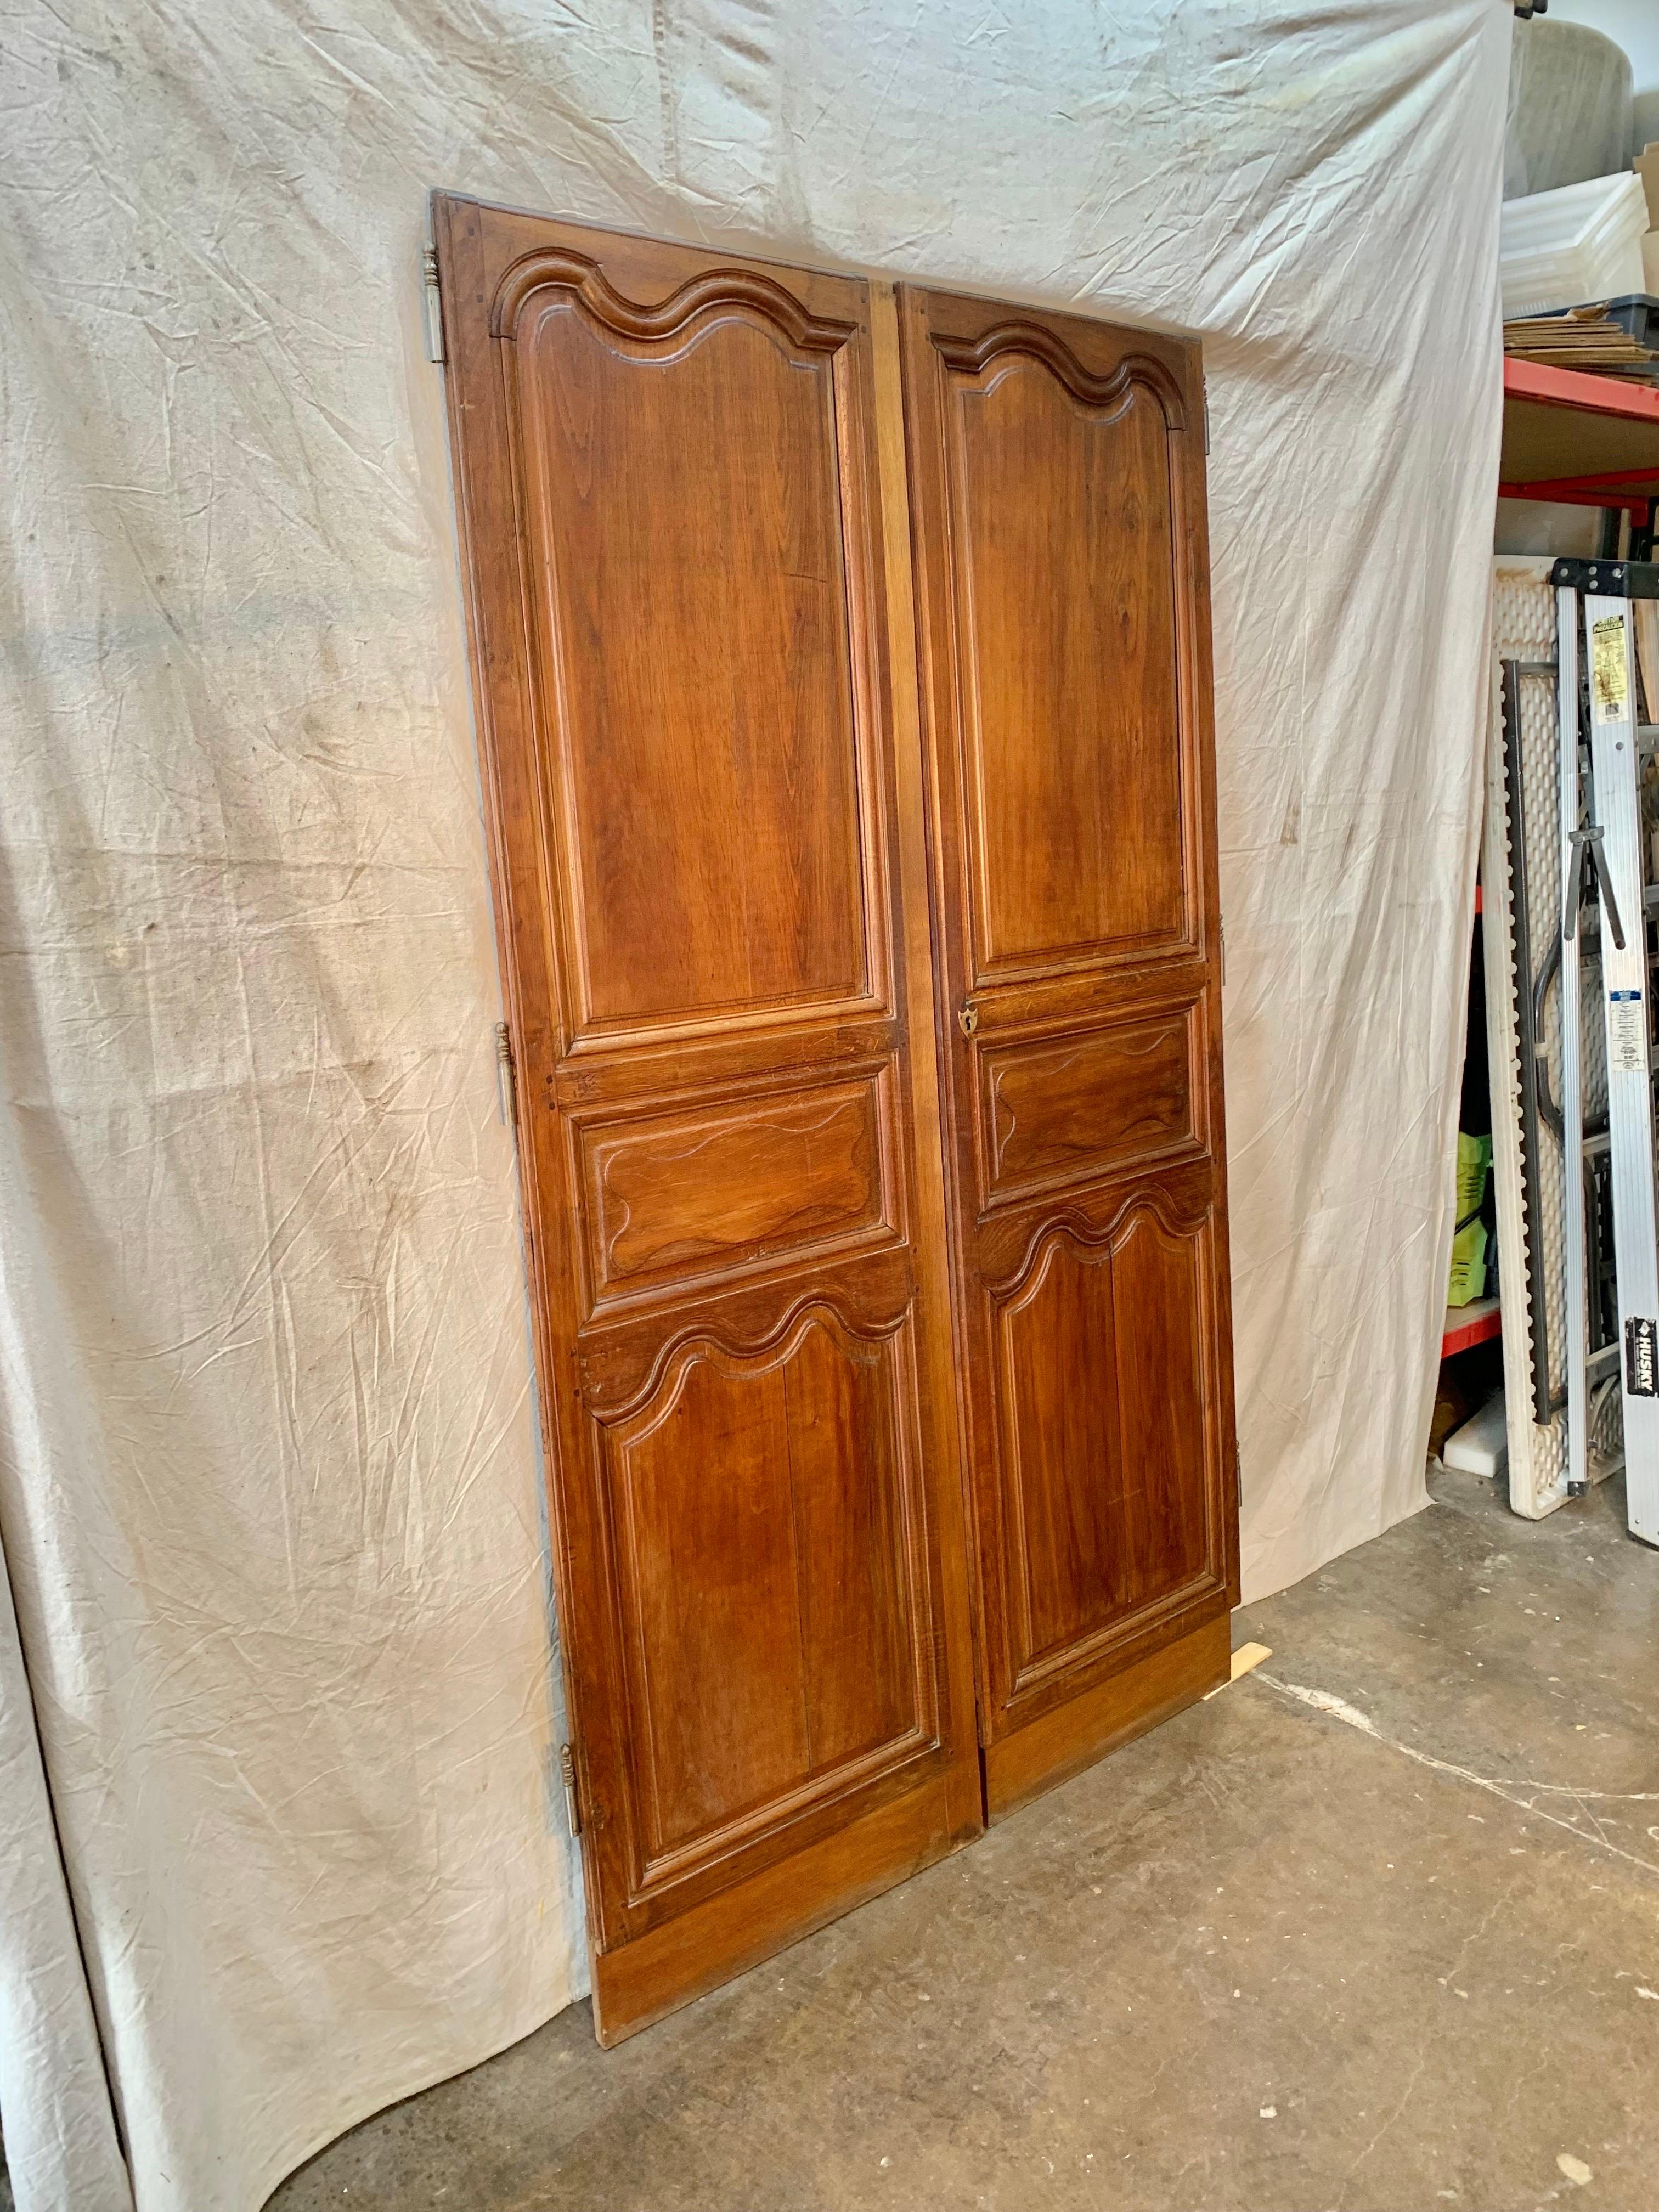 Found in the South of France, this pair of 19th Century French Armoire Doors once graced a beautiful armoire that was made in the 1800's. Hand crafted from walnut, the doors display three panels, the original escutcheon plate, locking hardware and